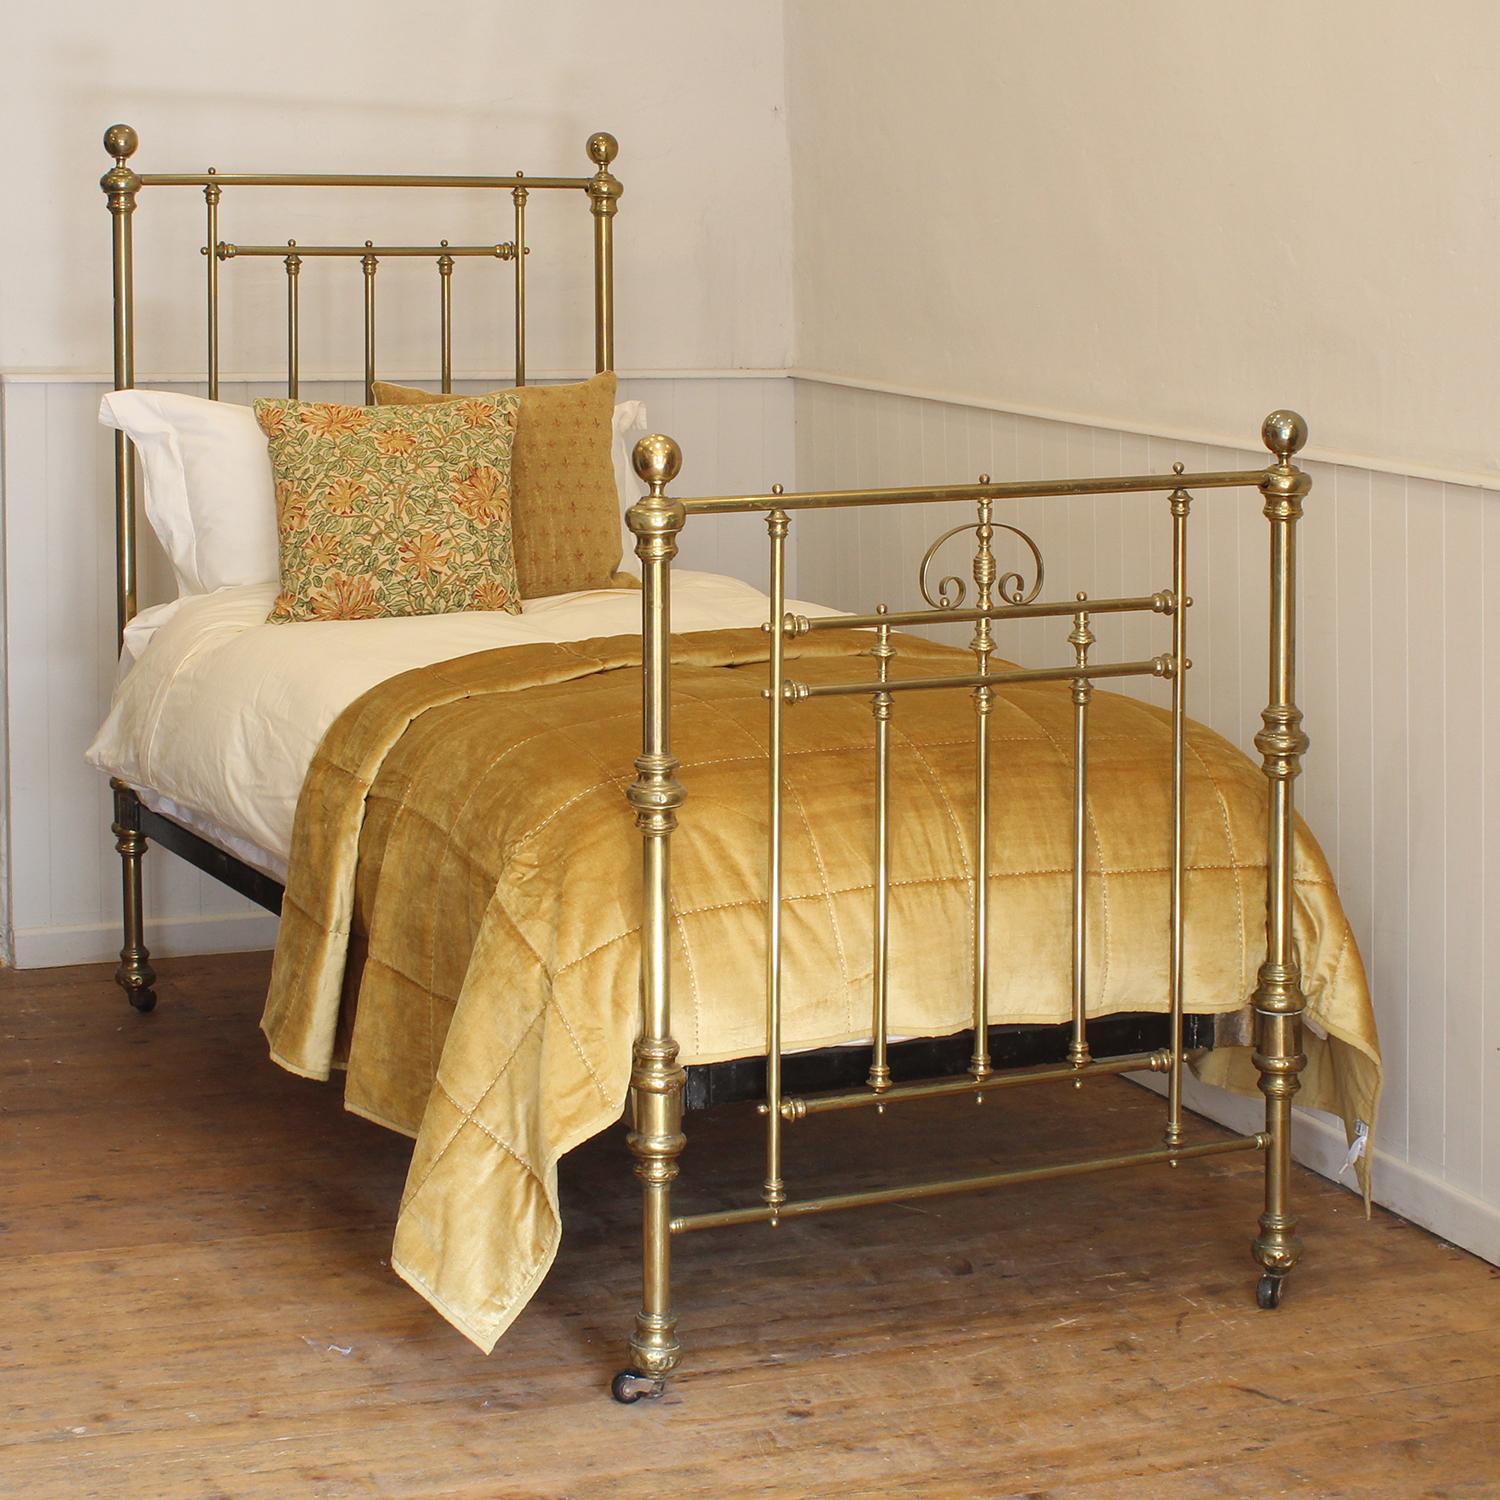 A traditional brass and iron Victorian single bed with fine patina and decorative foot board.
This bed takes a standard UK single 3ft wide x 6ft 3in long base and mattress, but will take a US twin 38 inch wide base and mattress with a slight